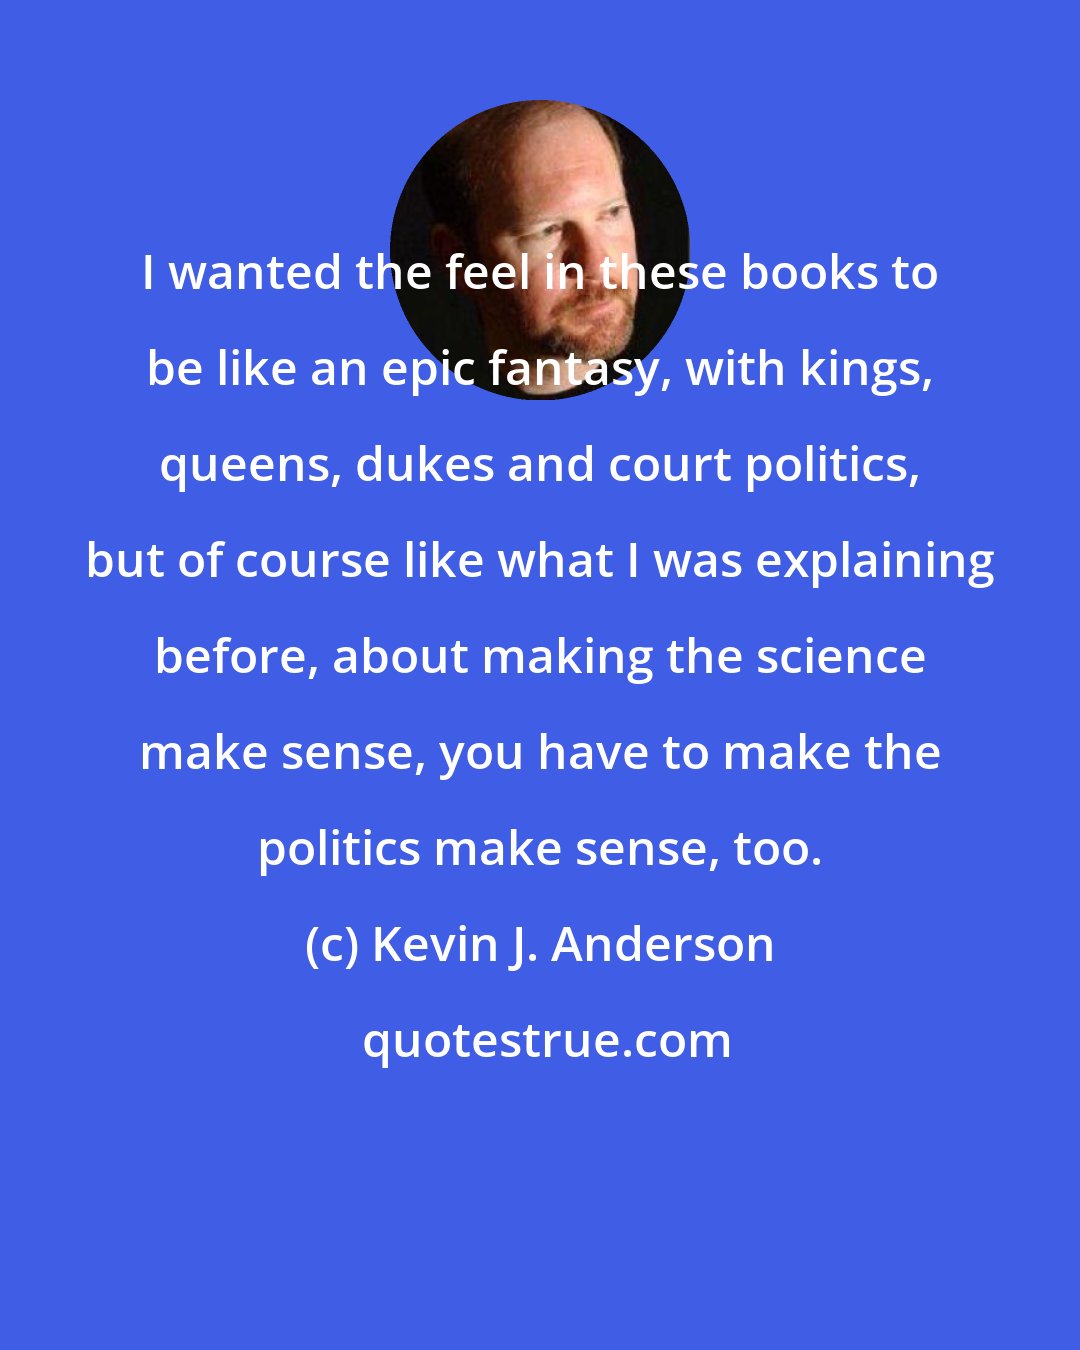 Kevin J. Anderson: I wanted the feel in these books to be like an epic fantasy, with kings, queens, dukes and court politics, but of course like what I was explaining before, about making the science make sense, you have to make the politics make sense, too.